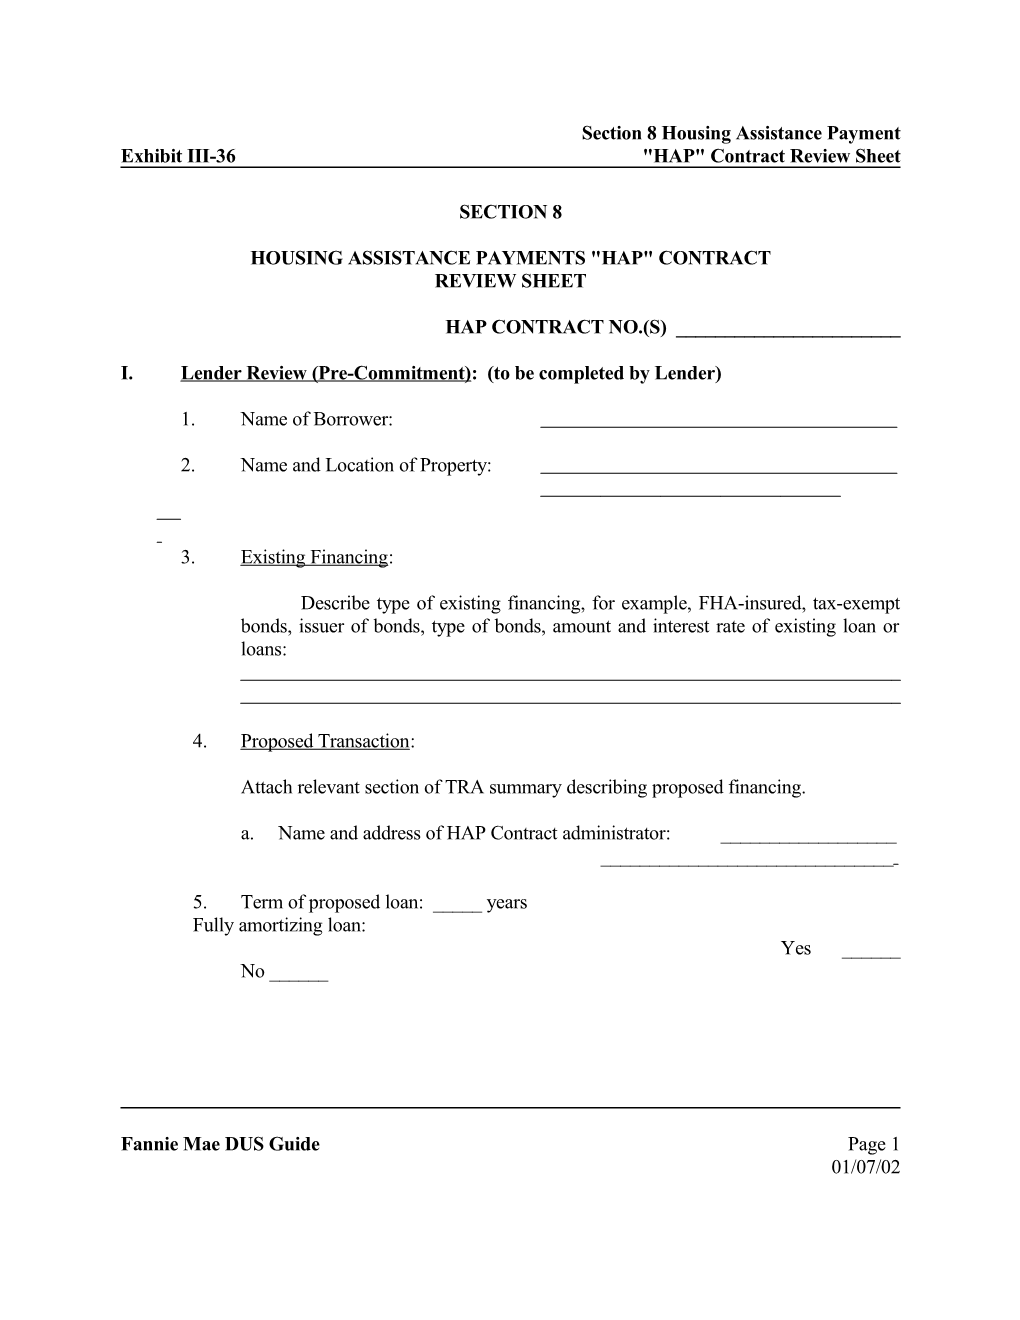 Section 8 Housing Assistance Payment HAP Contract Review Sheet